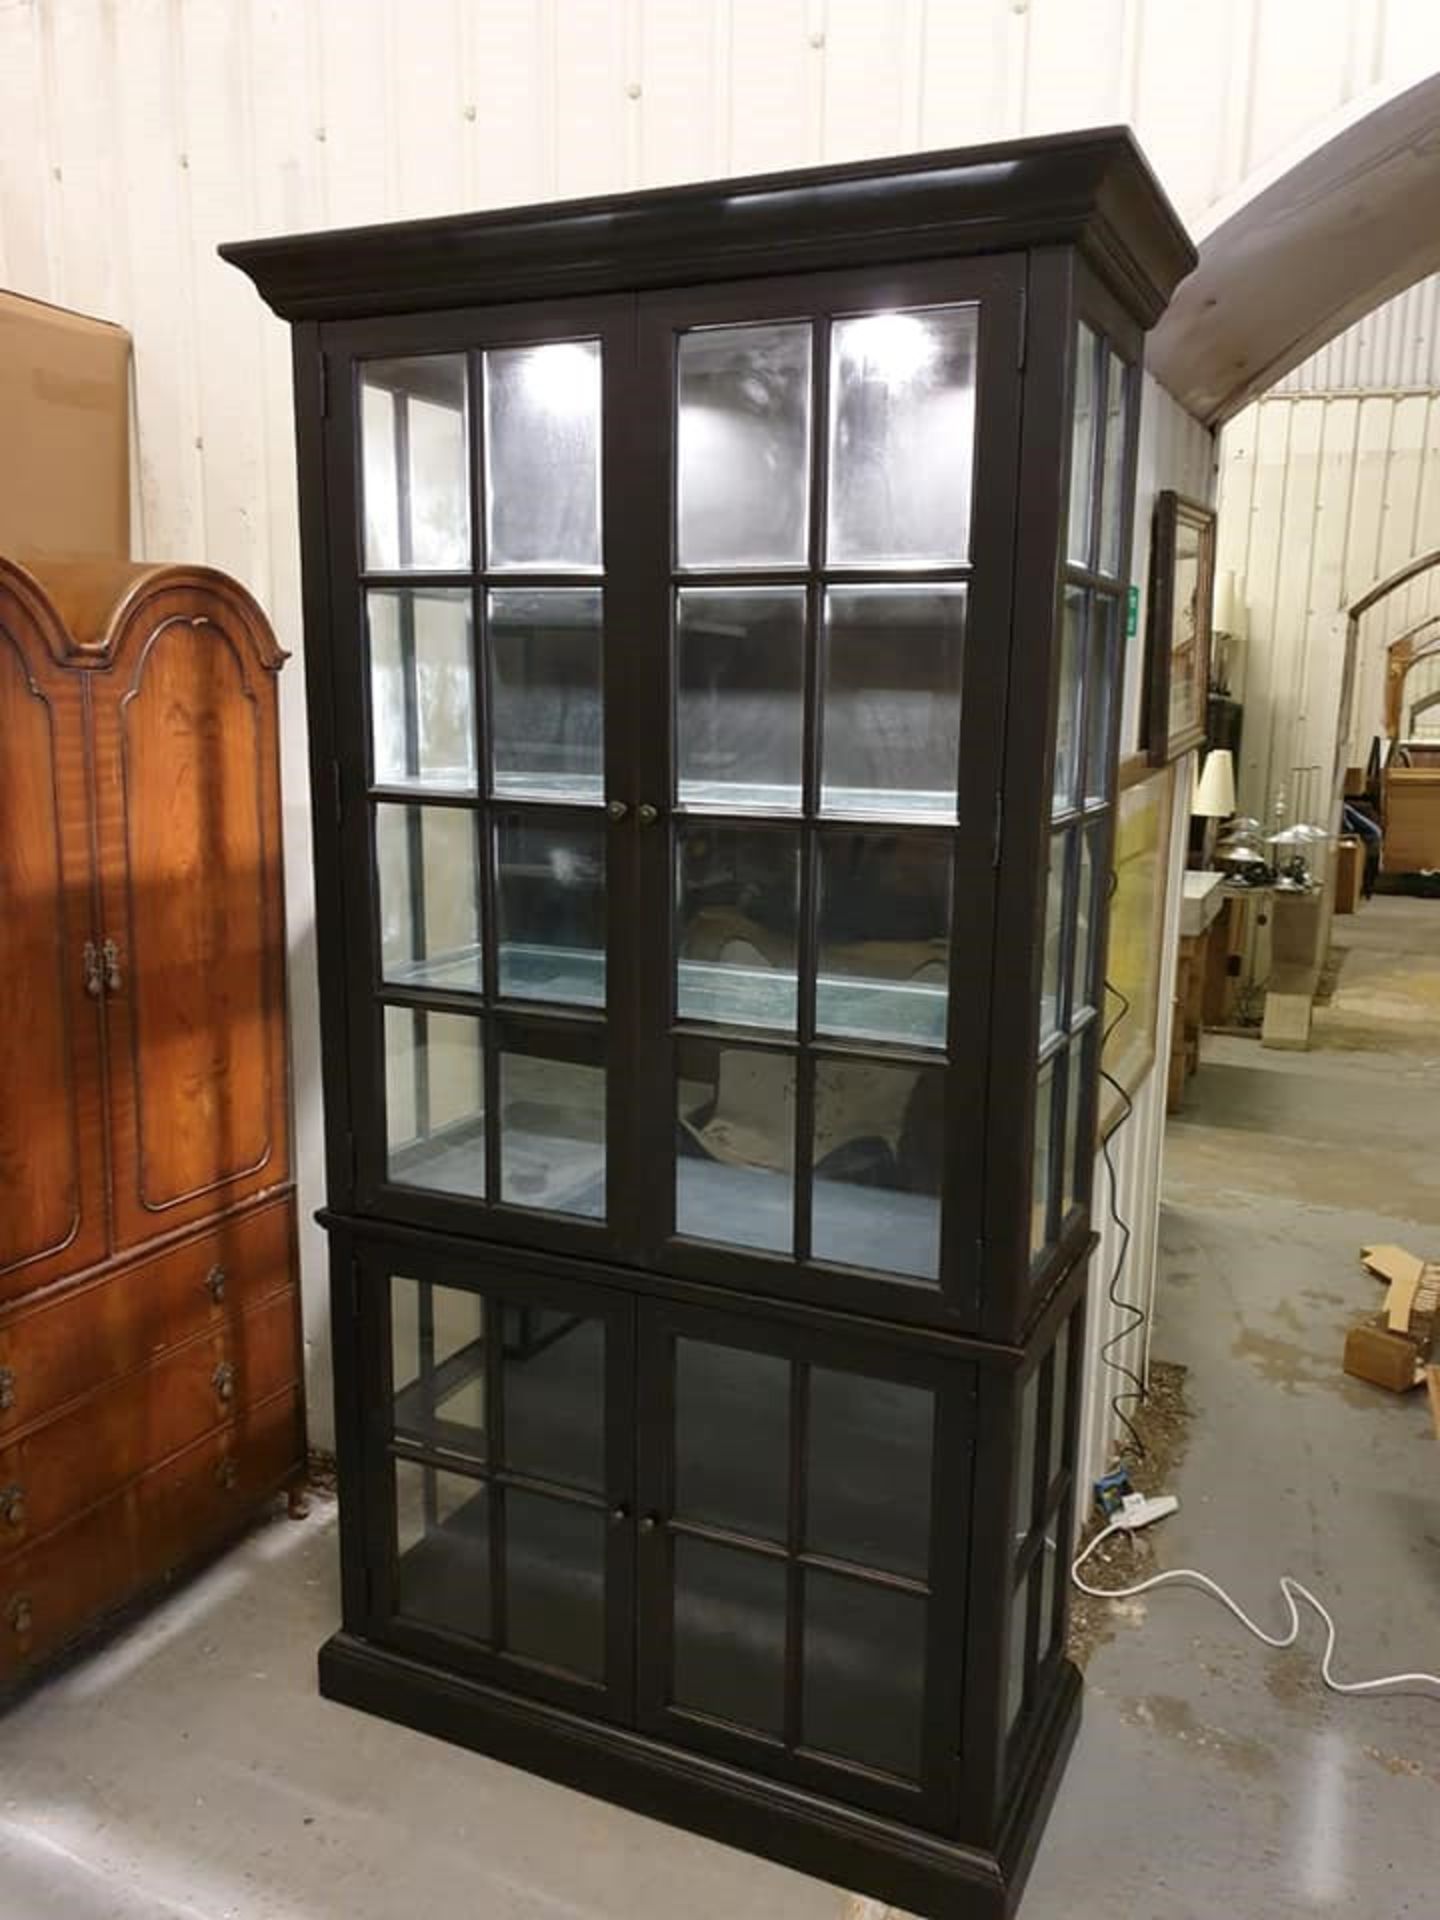 Waltham Display Cabinet / Bookcase Reminiscent Of A Vintage English Phone Booth The Beautifully